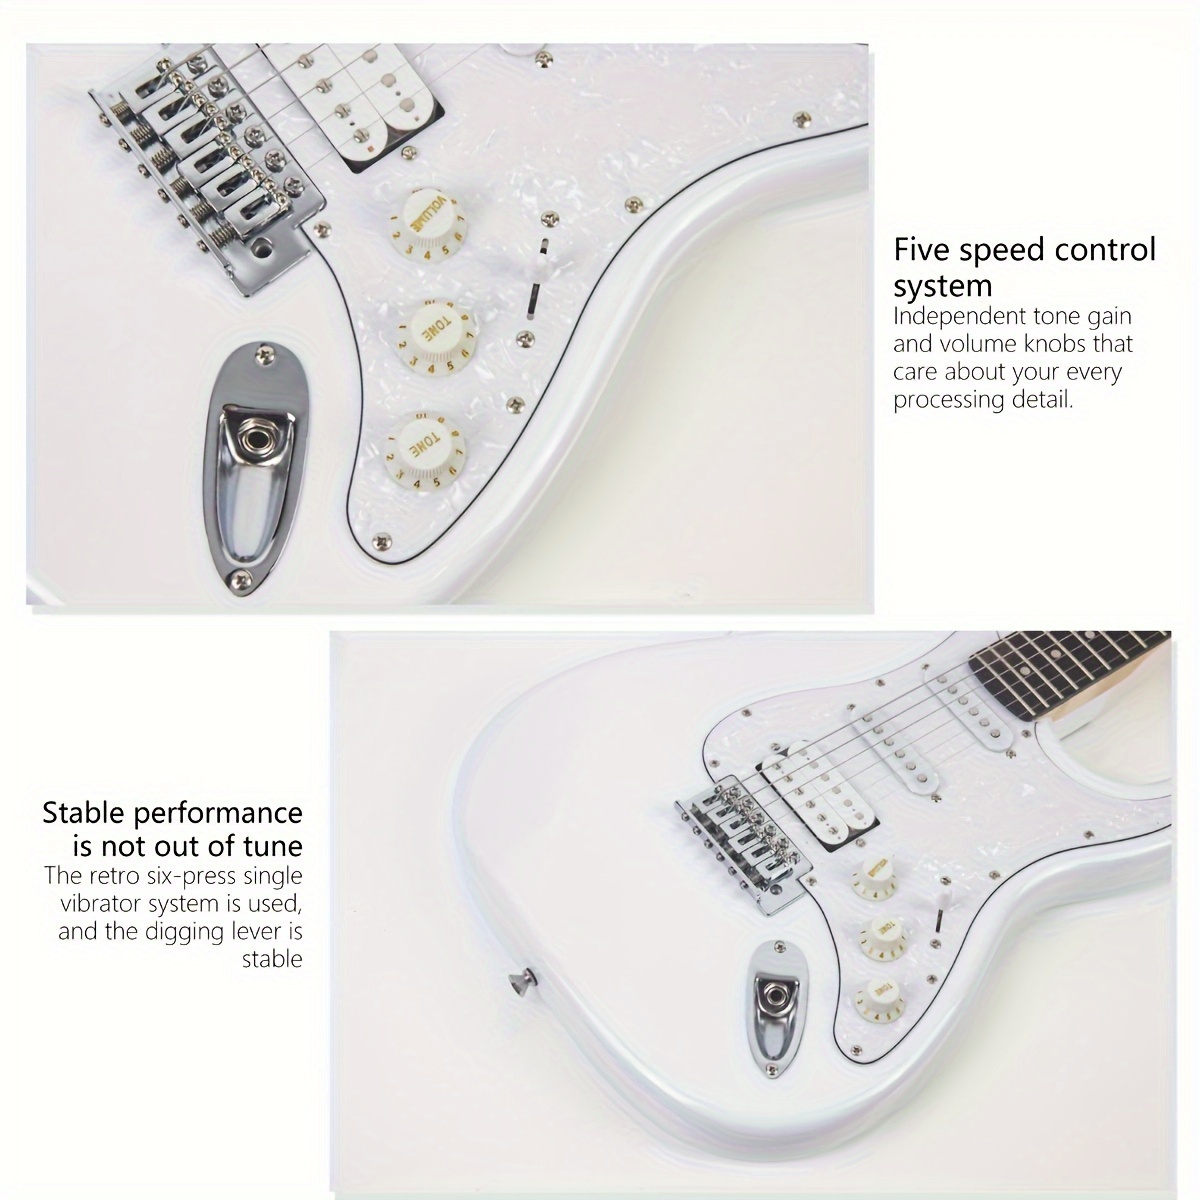 adult professional beginner solid color electric guitar smooth feel single pendulum st electric guitar set comes with a free electric guitar storage bag